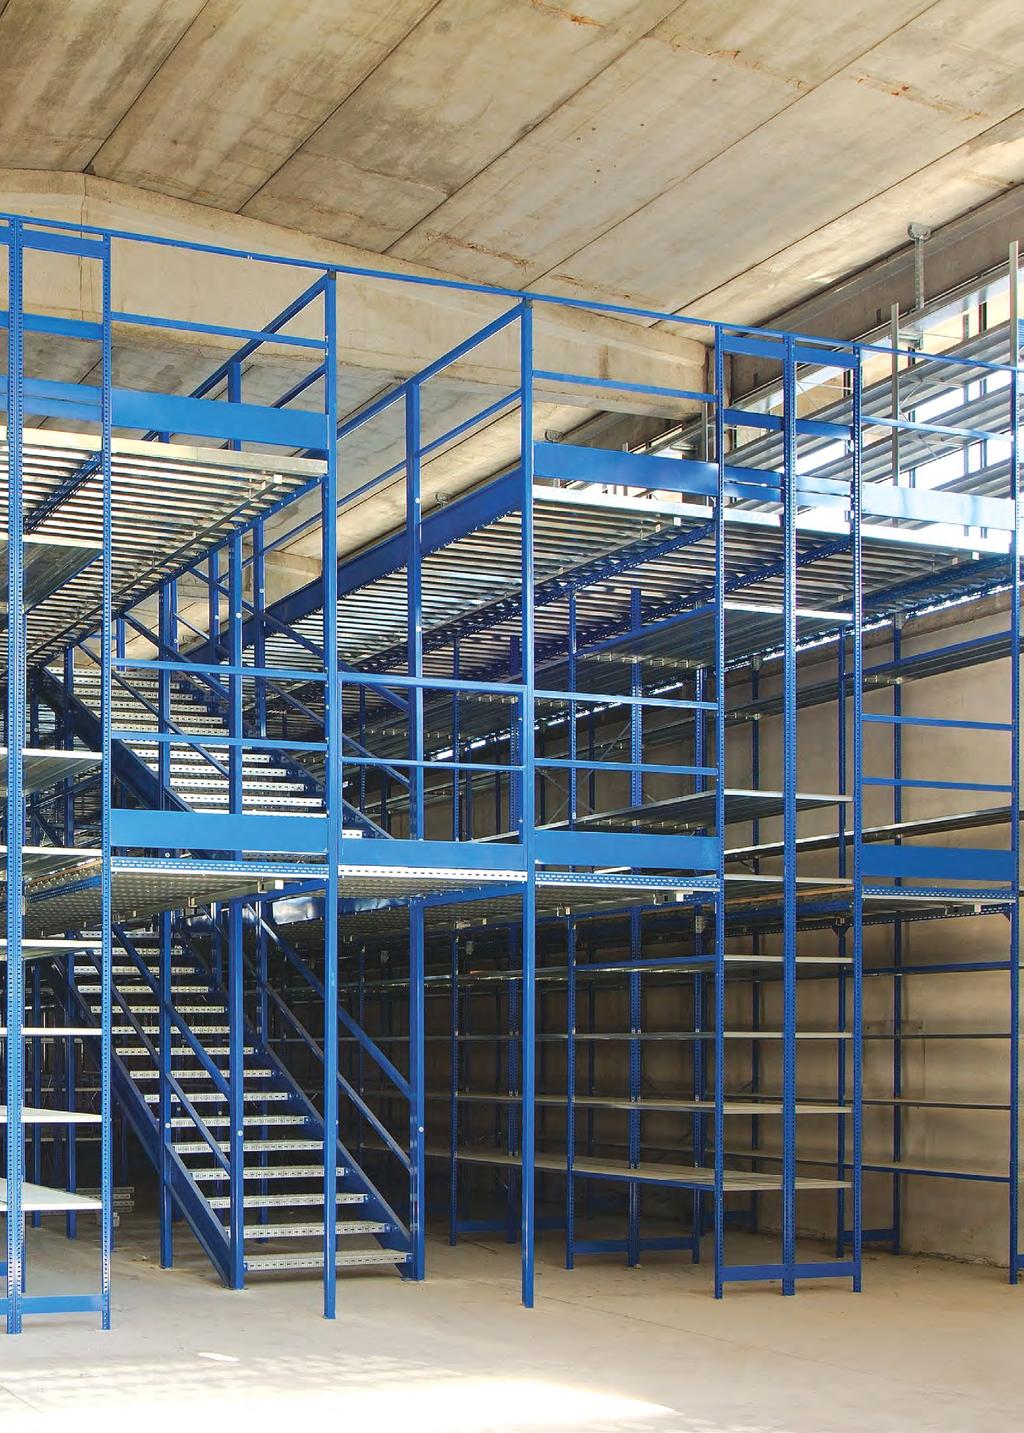 Expo shelving has been sold to thousands of customers for the past 2 years Index 5 6-7 8-9 10-11 1 1-15 16 18 19 20 21 22 ---- 2 Expo Systems Overview Expo / Expo Shelf Overview Loadings &